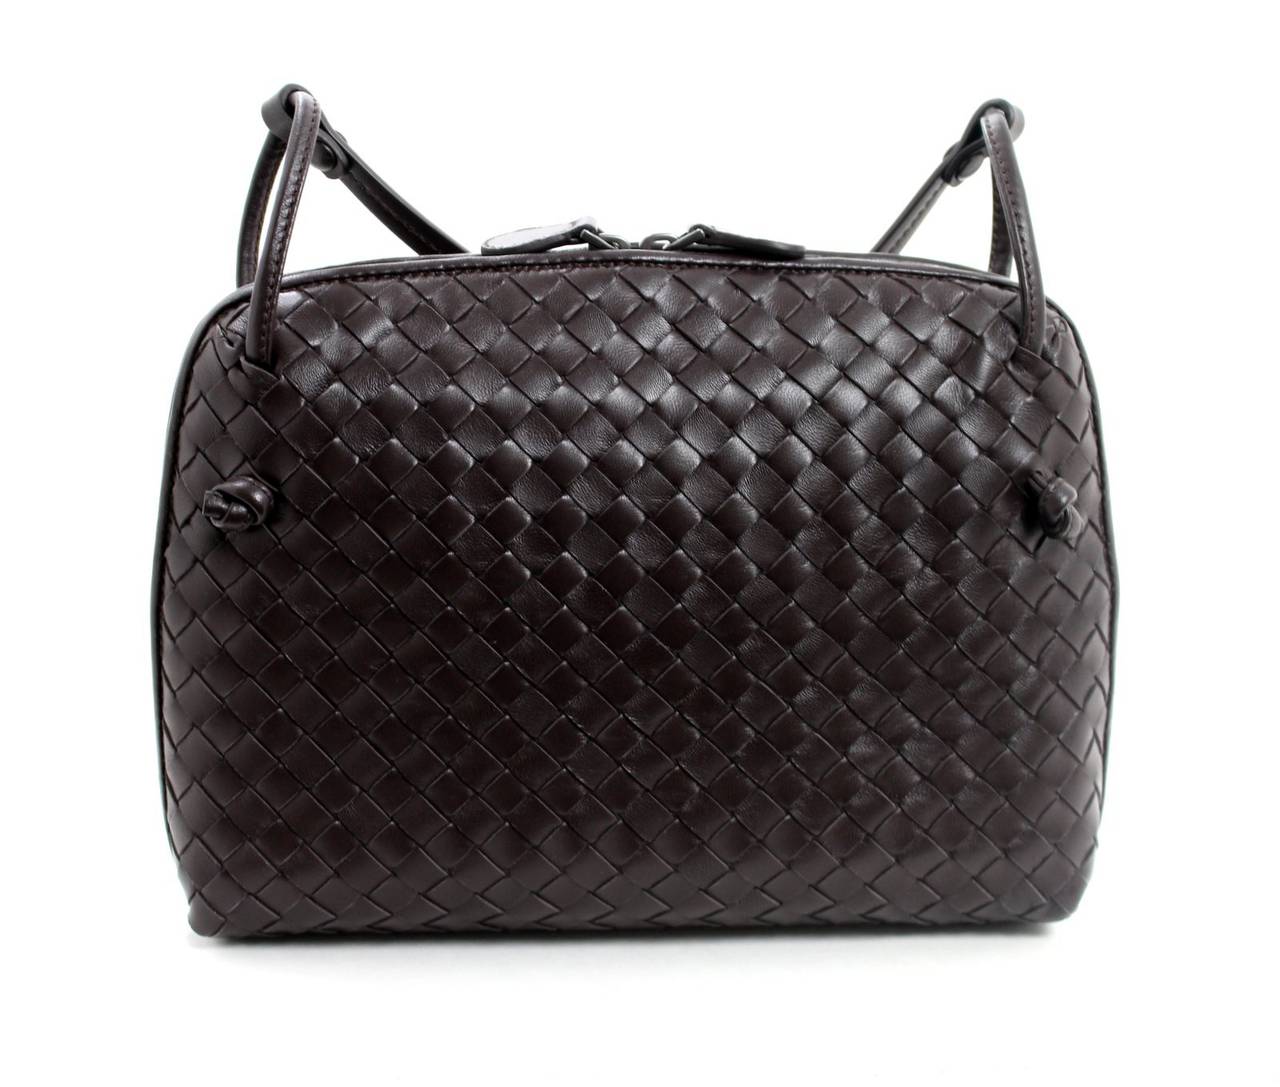 Brand new, this Bottega Veneta Ebano Intrecciato Leather Cross Body is from the current collection and retails for over $1,450.00 with taxes. Fashionably smaller in size, it comes in a variety of colors though neutral deep brown is a smart addition